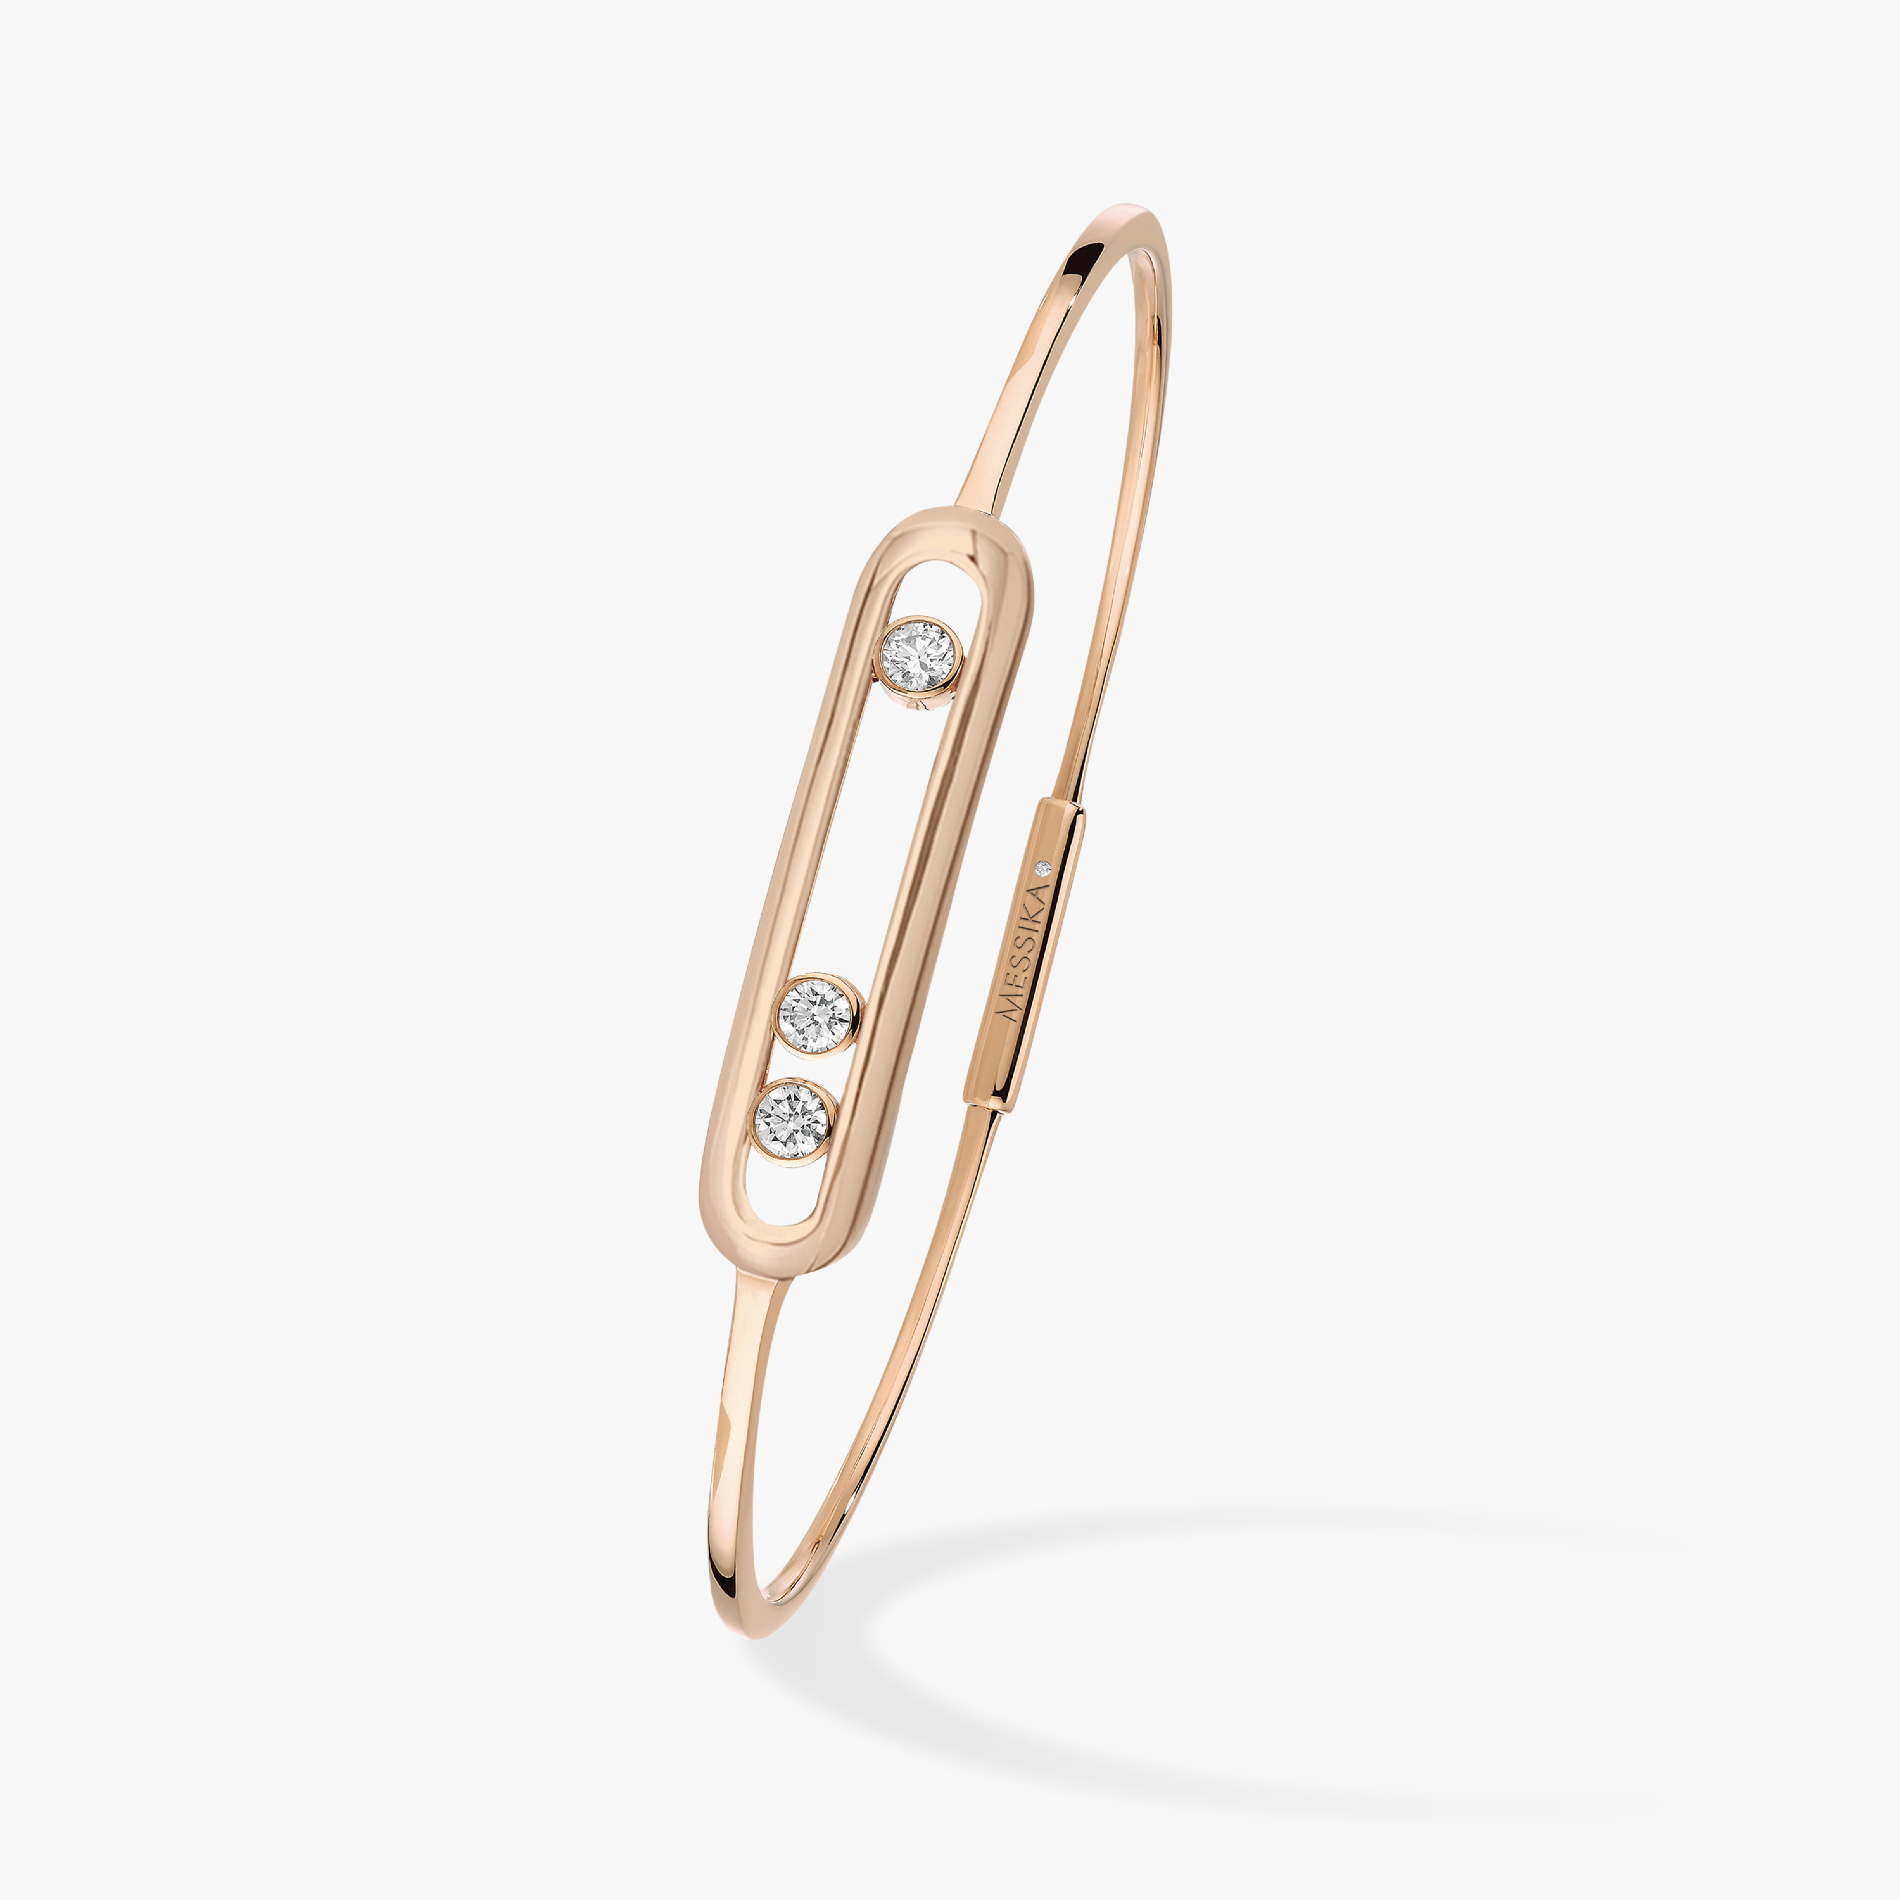 Move Thin Pink Gold For Her Diamond Bracelet 04068-PG